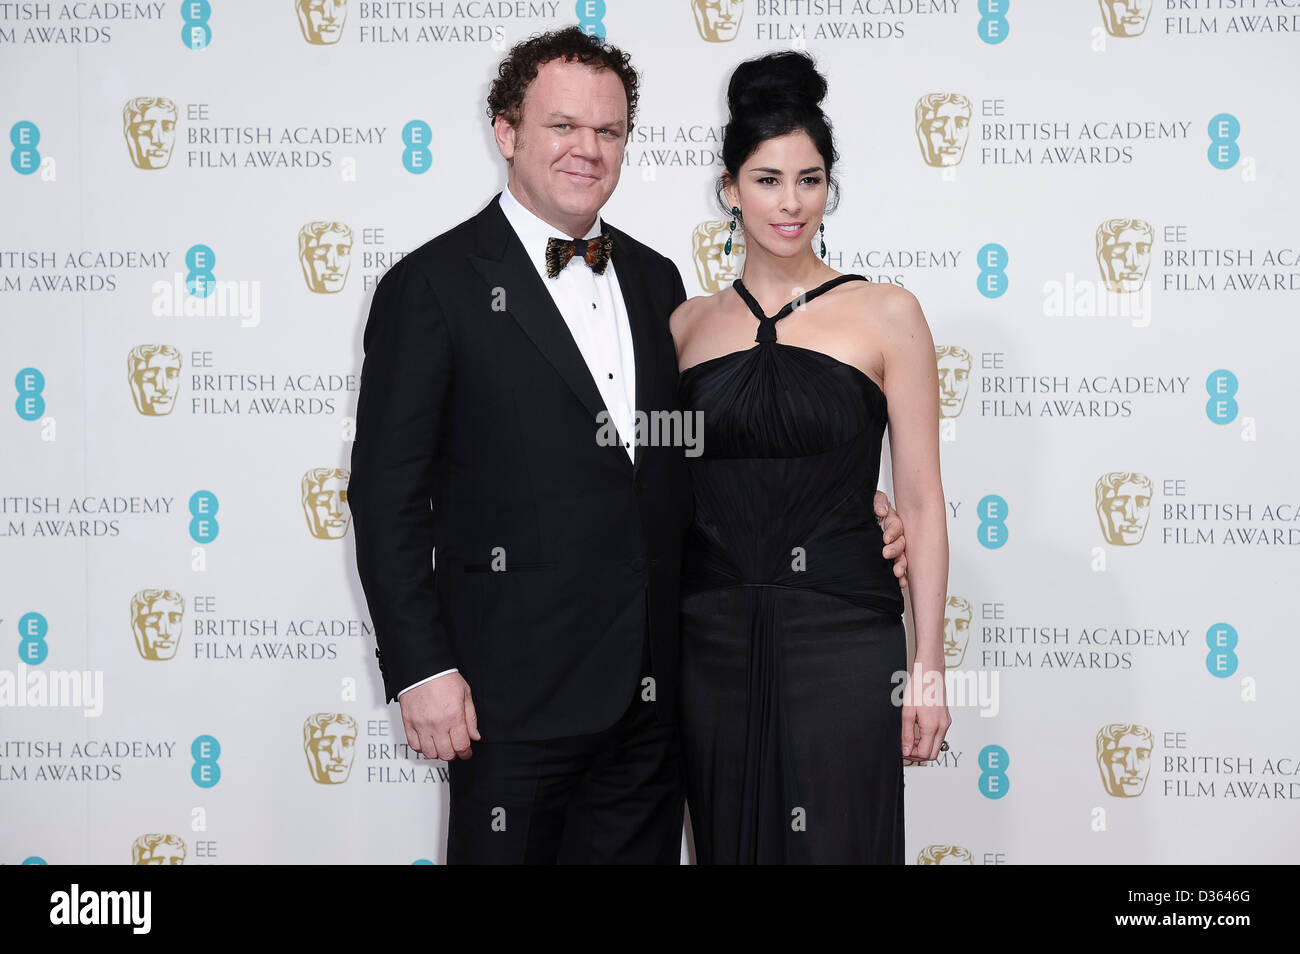 London, UK. Feb 10th, 2013. Presenters John C. Reilly and Sarah Silverman pose in the press room at the EE British Academy Film Awards at The Royal Opera House on February 10, 2013 in London, England. Credit: London Entertainment/Alamy Live News Stock Photo